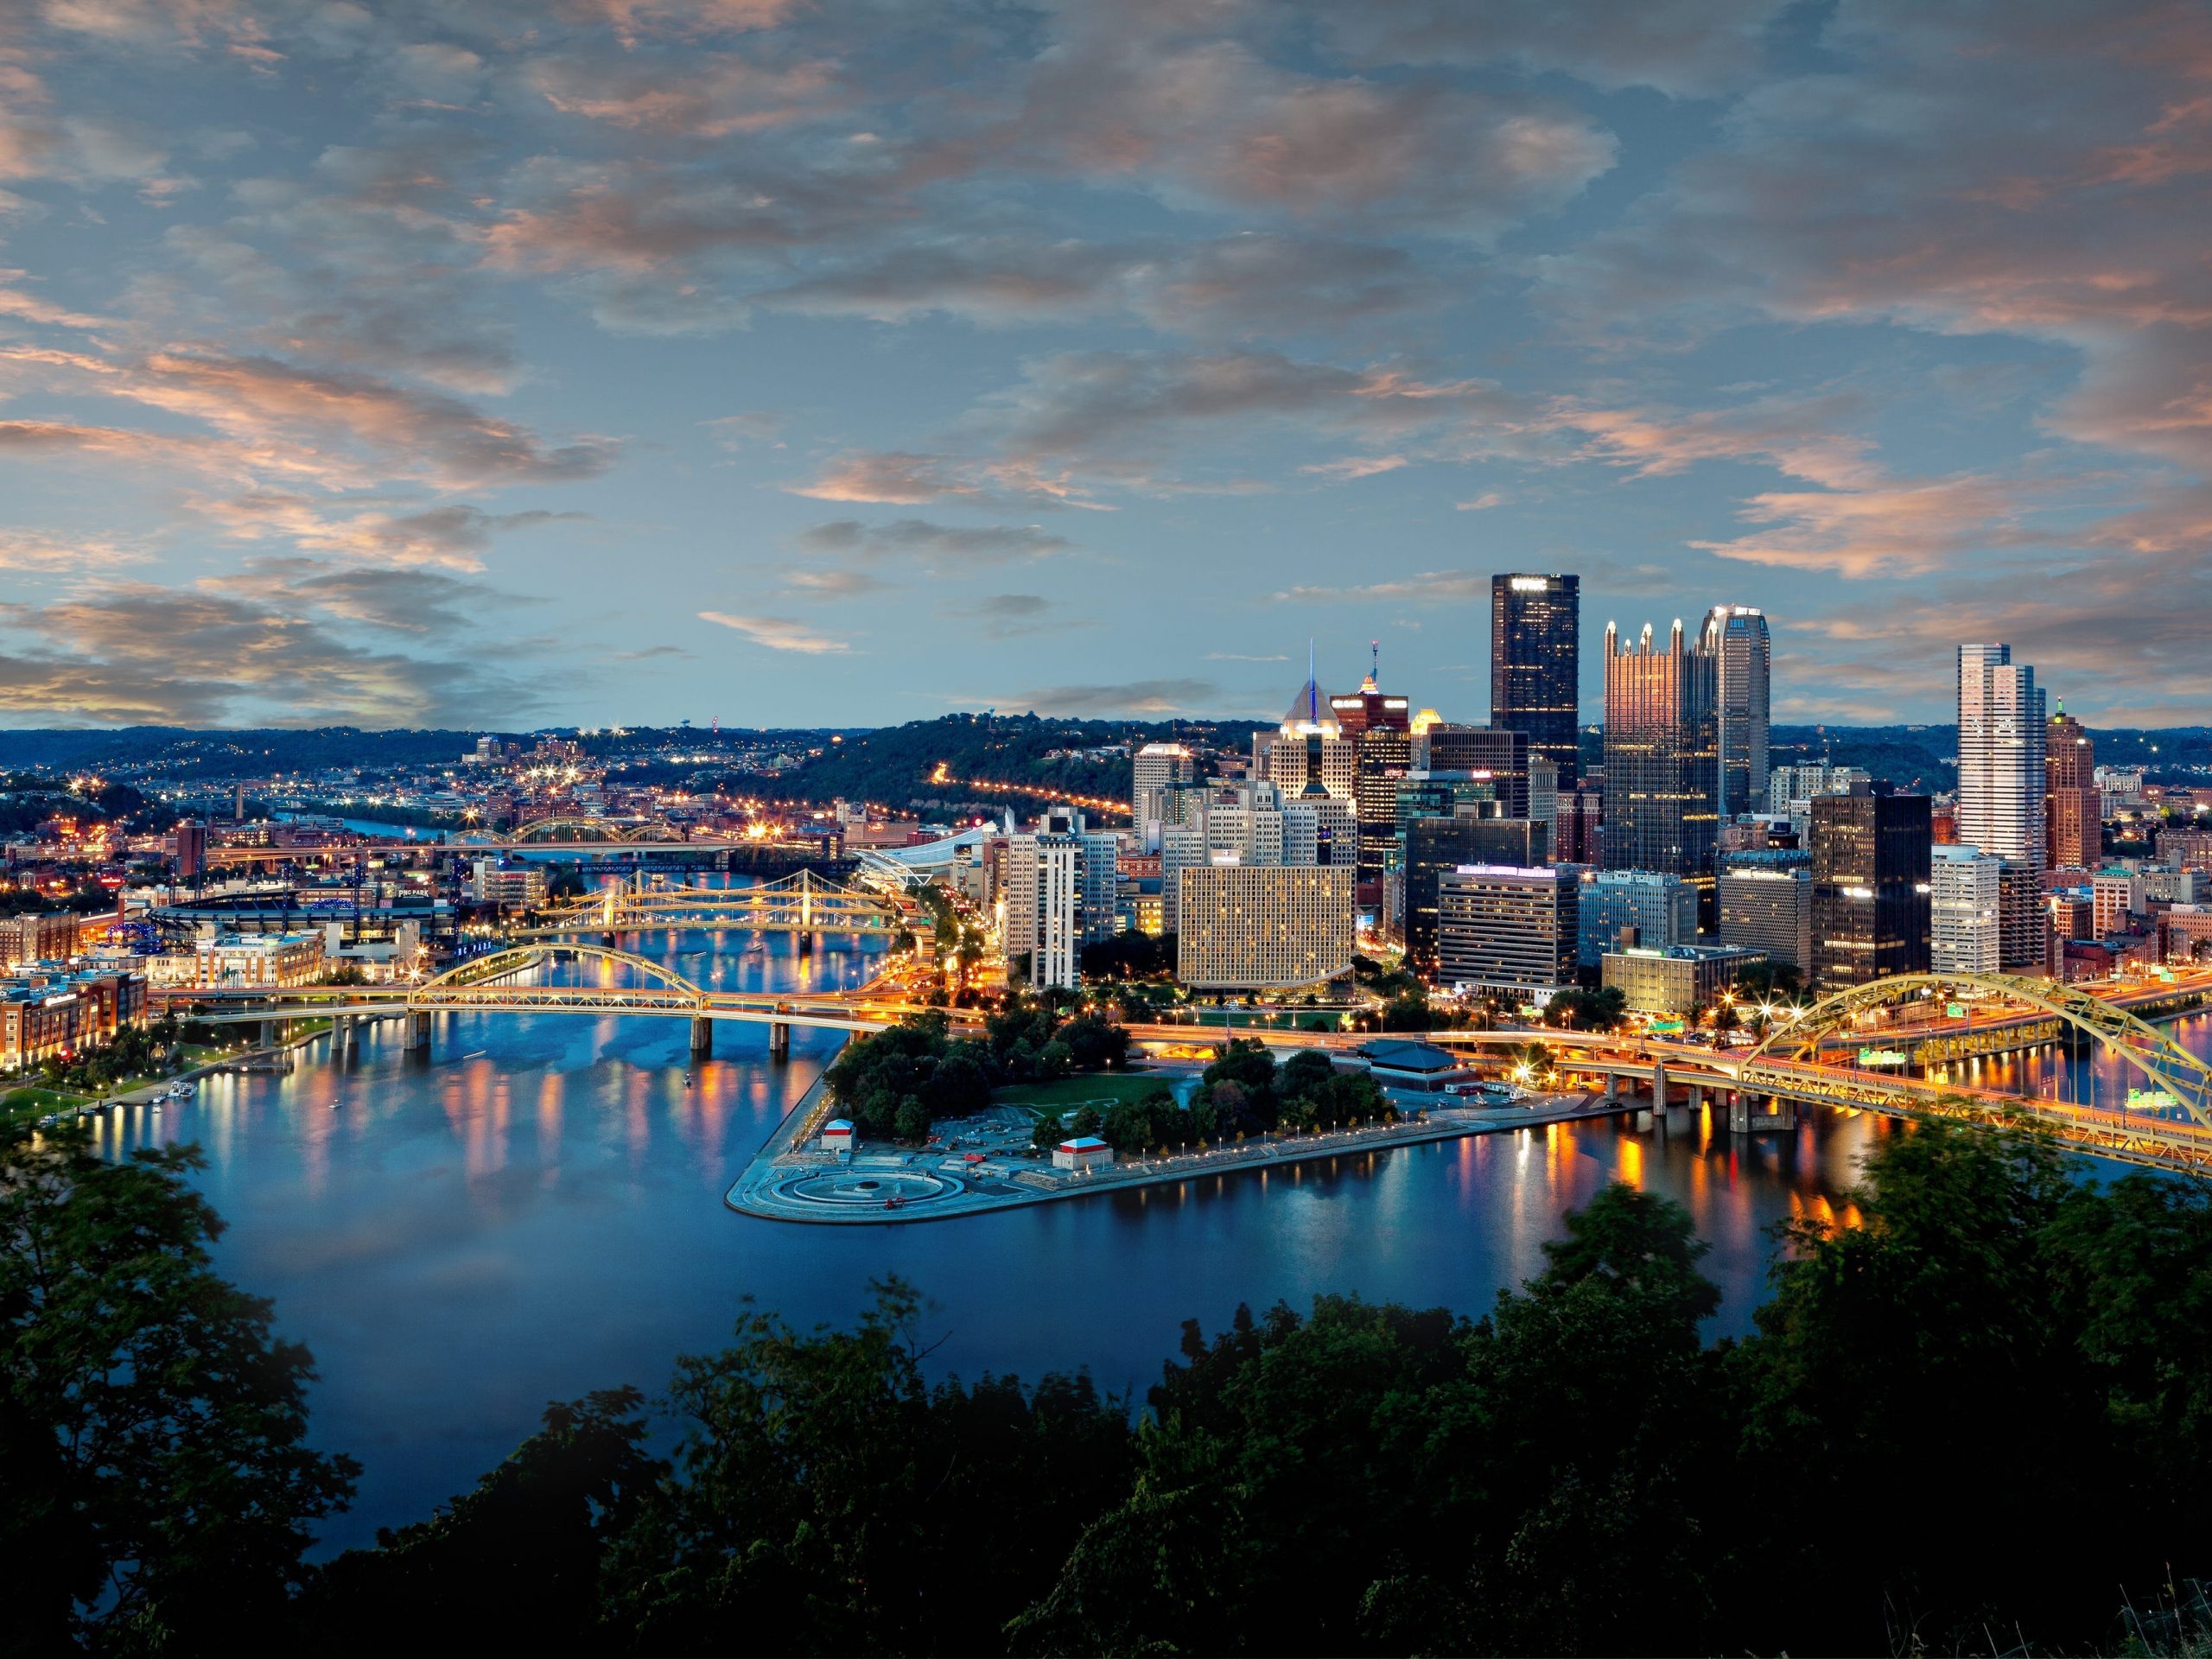 The Pittsburgh skyline at dusk.